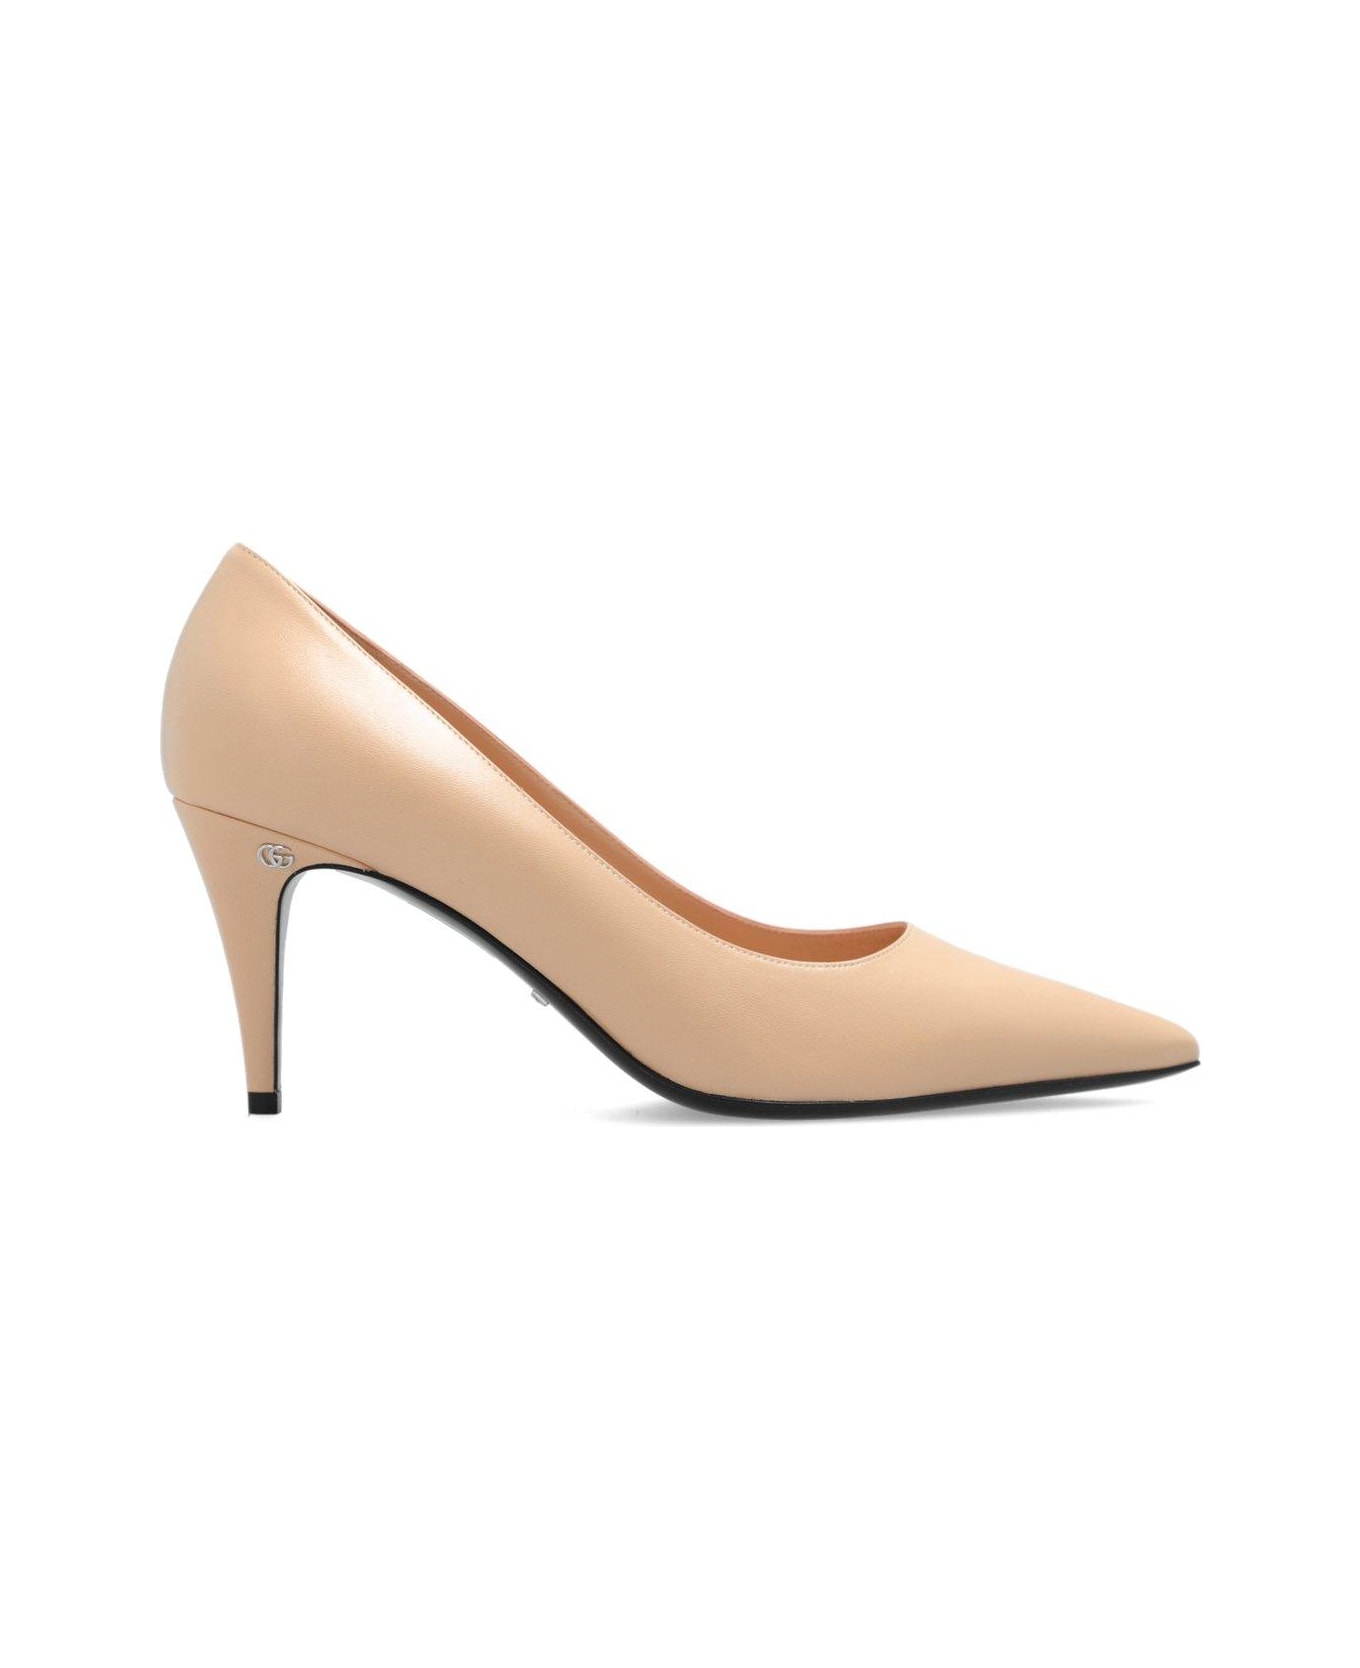 Gucci Pointed Toe Slip-on Pumps - Powder